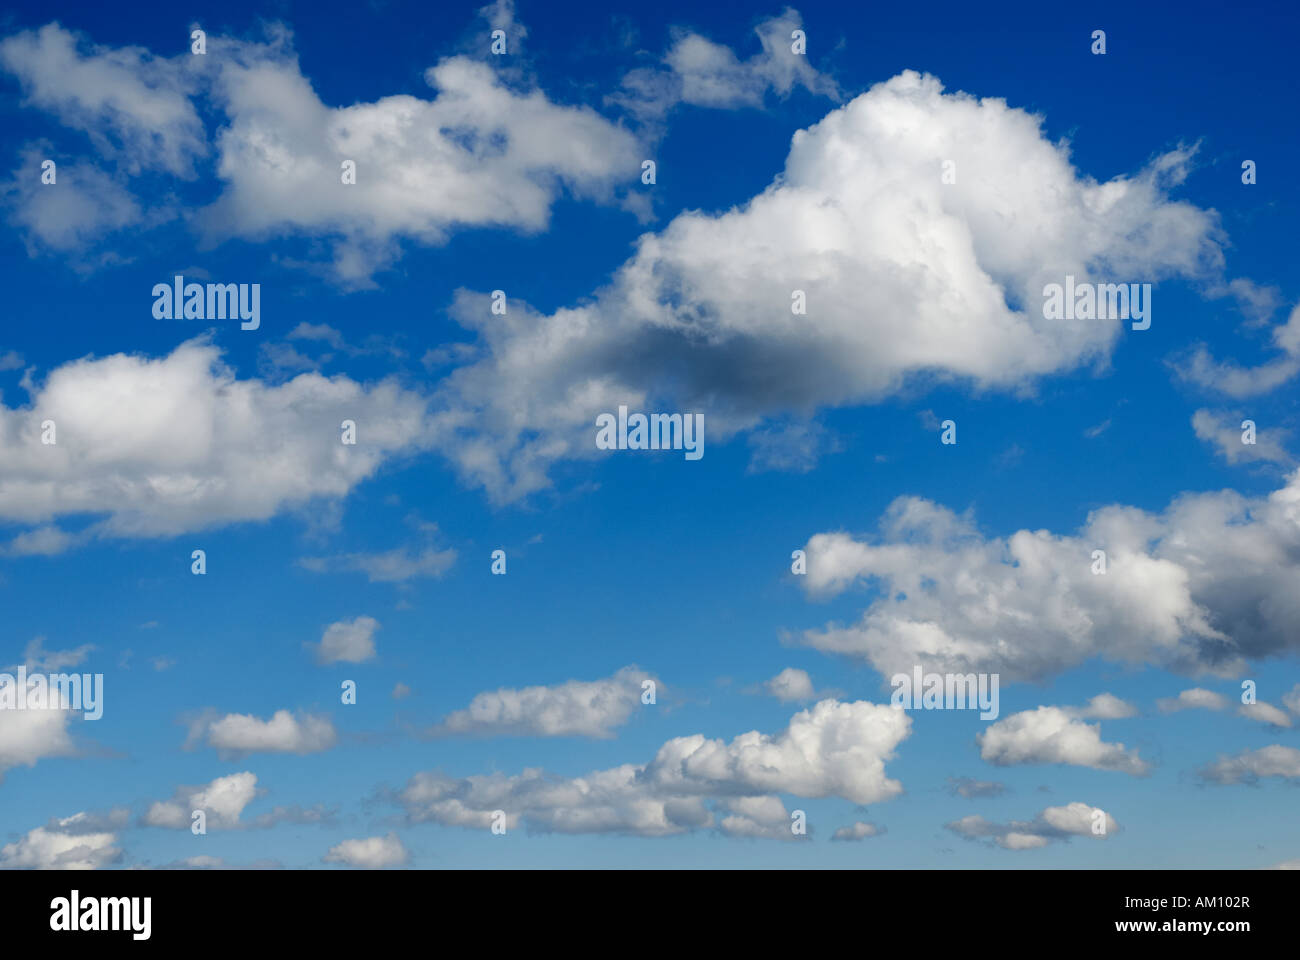 Fast flying cumulus clouds on brilliant bue sky Stock Photo